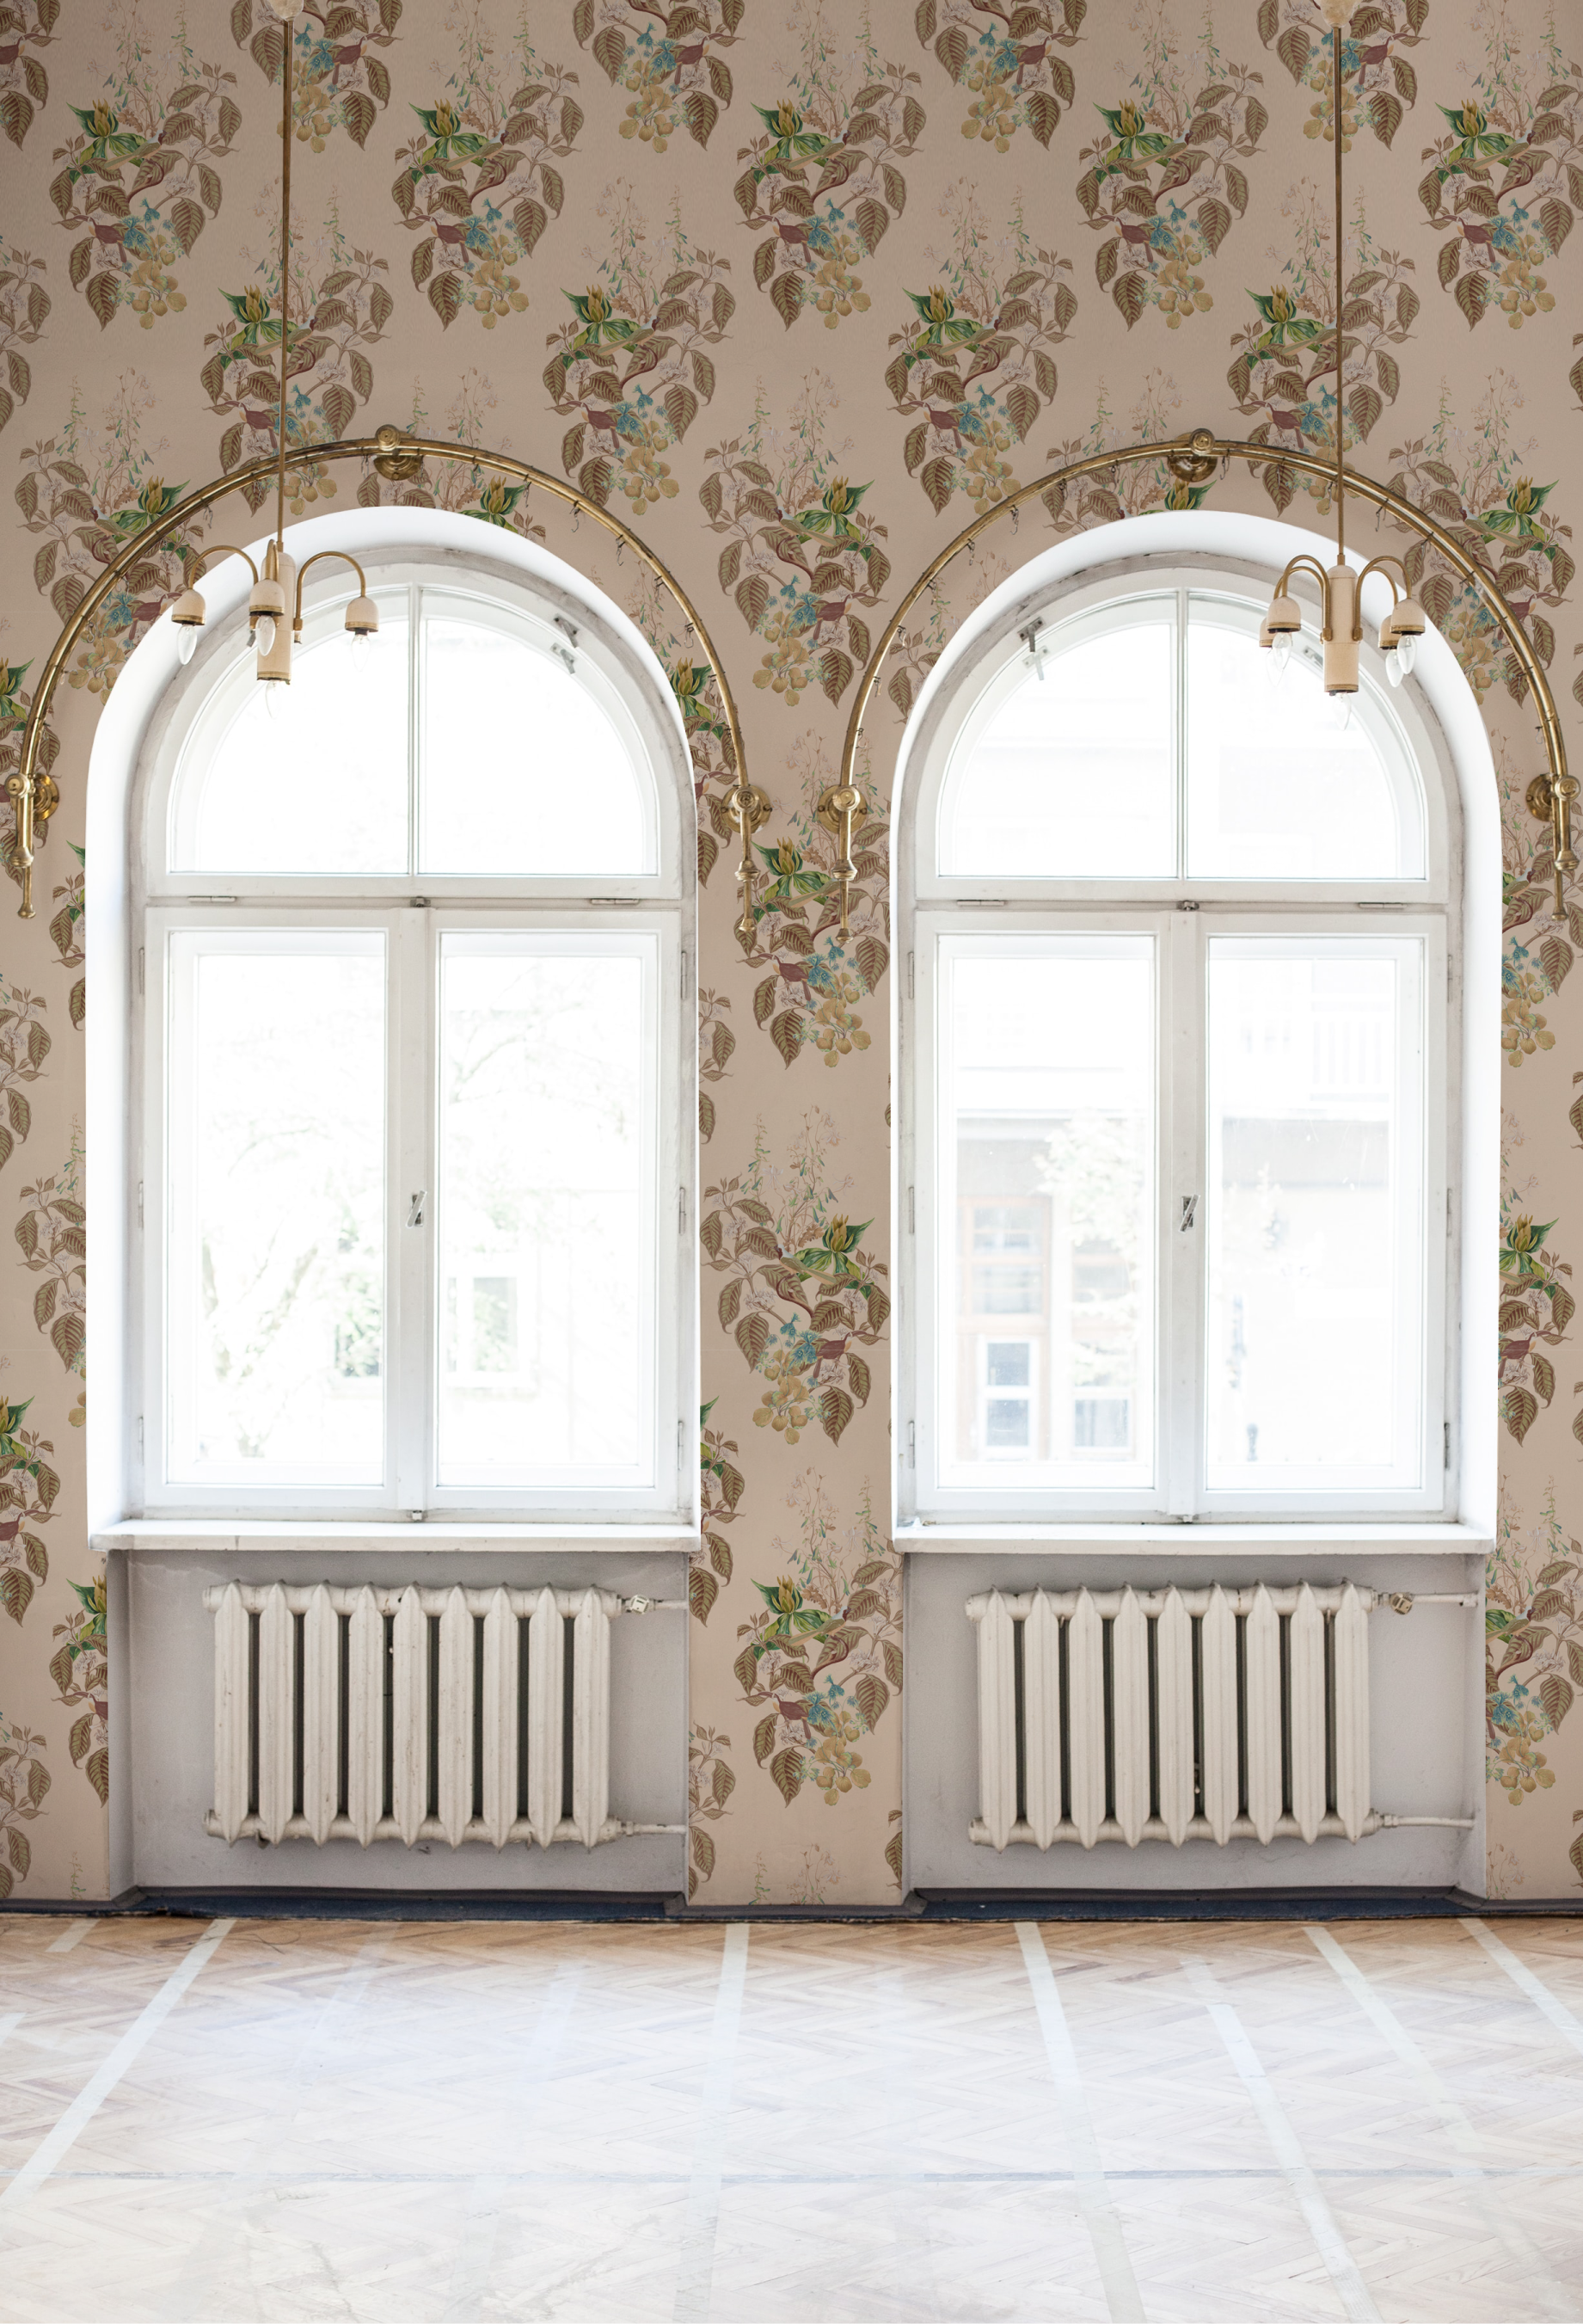 Two large windows surrounded by luxury Aviary Isle Wallpaper in Ecru by Deus ex Gardenia. Photo by Katie Luka.